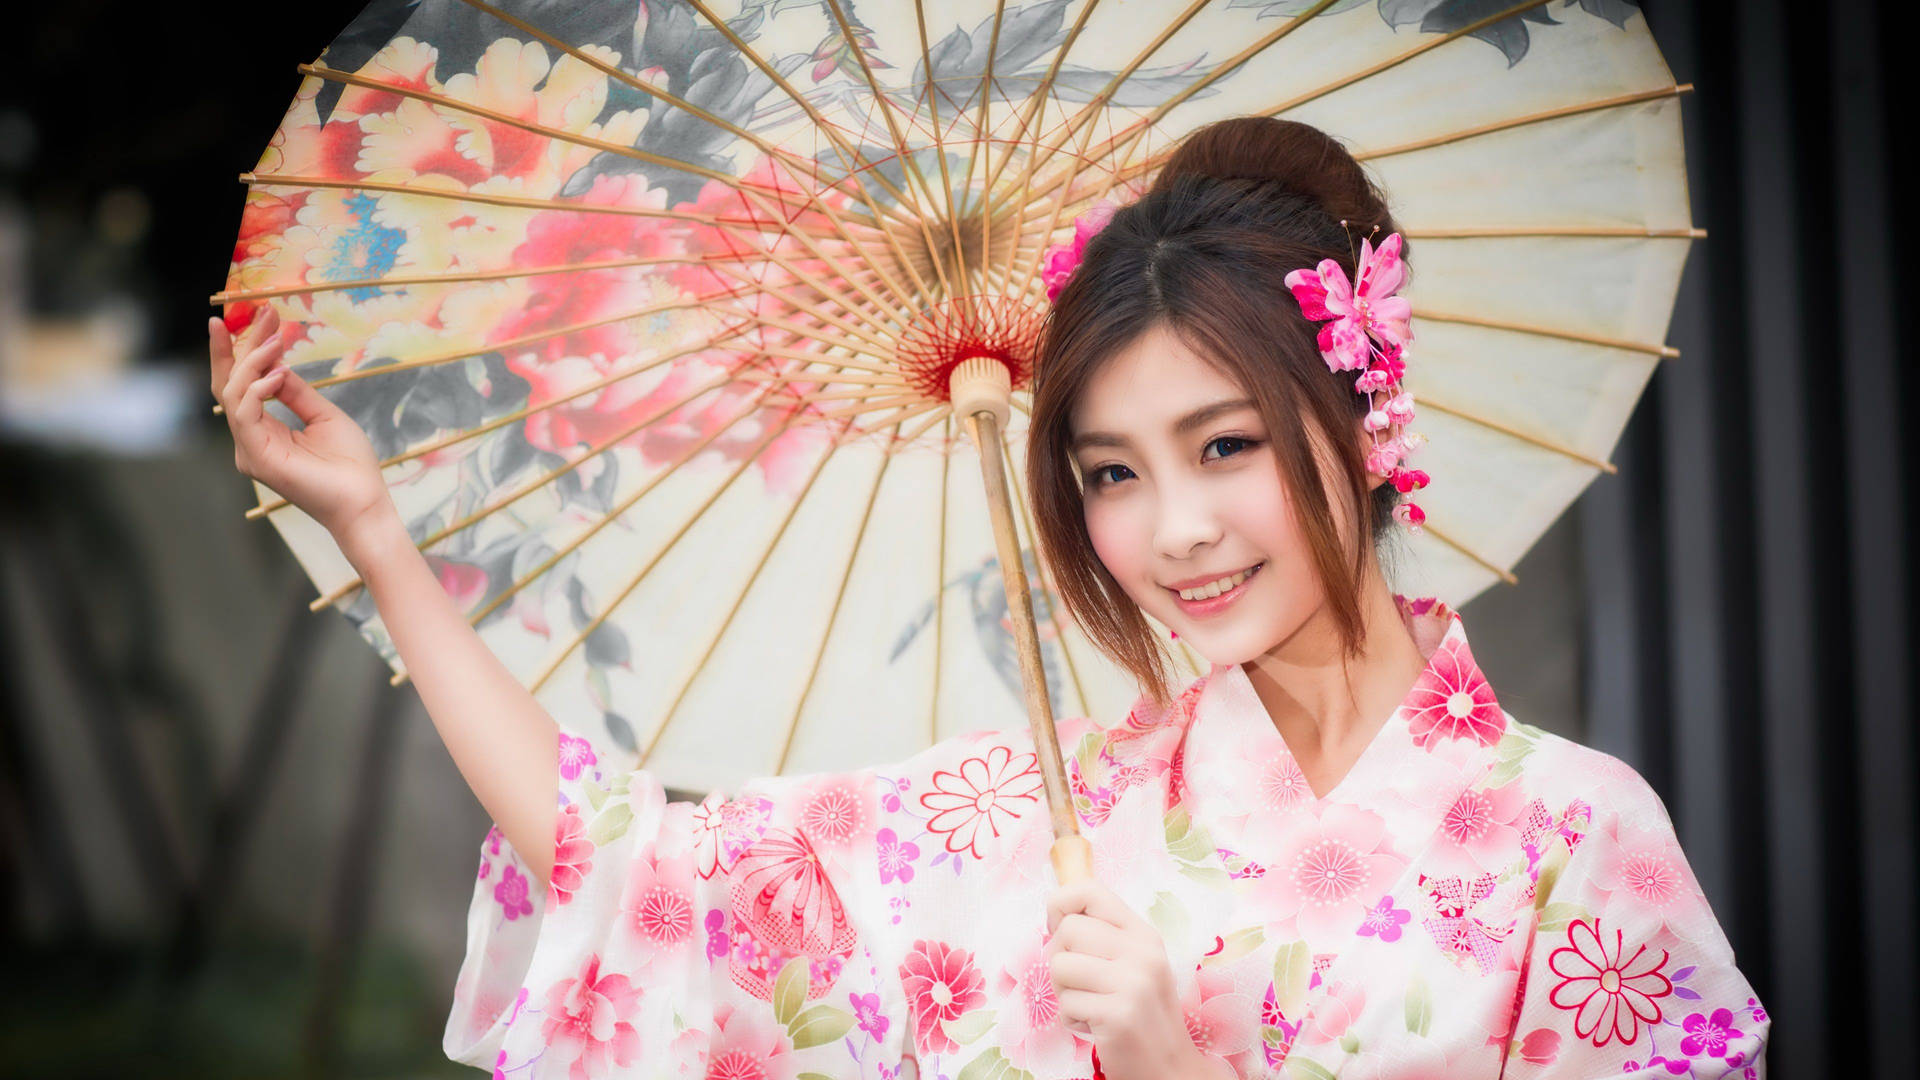 Japanese Girl With Parasol Wallpaper